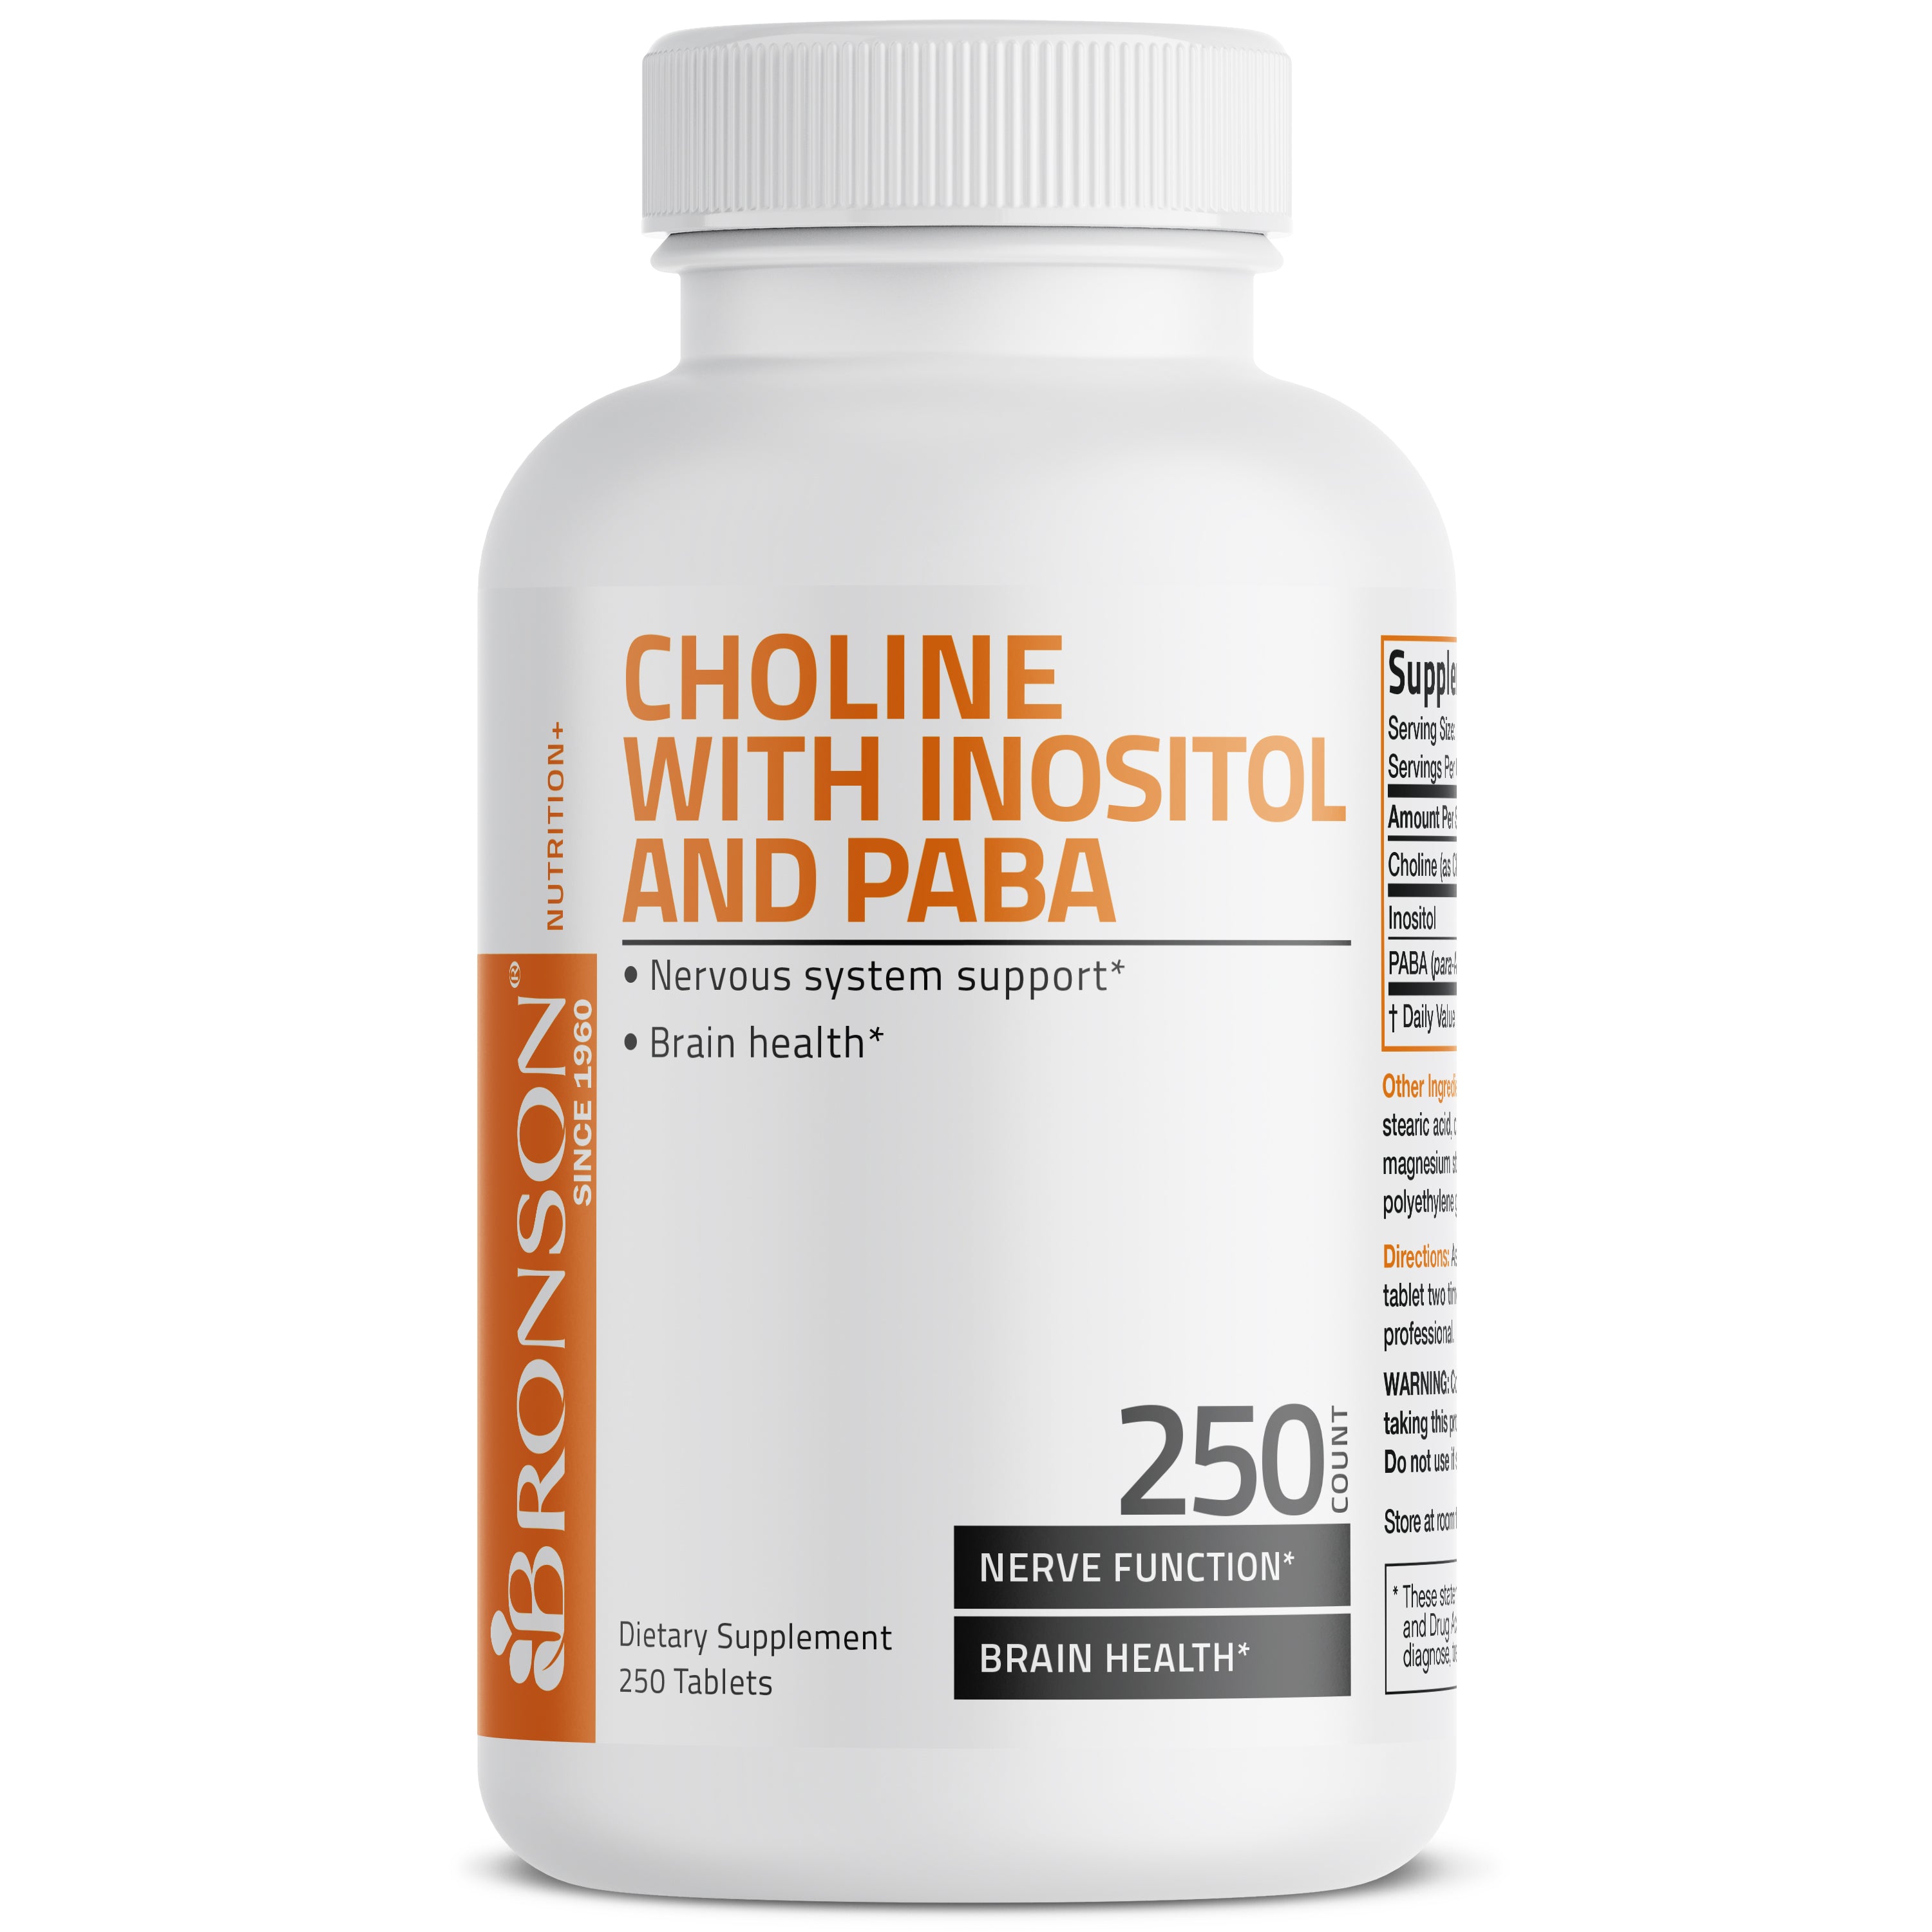 Choline with Inositol and Paba - 250 Tablets view 3 of 6